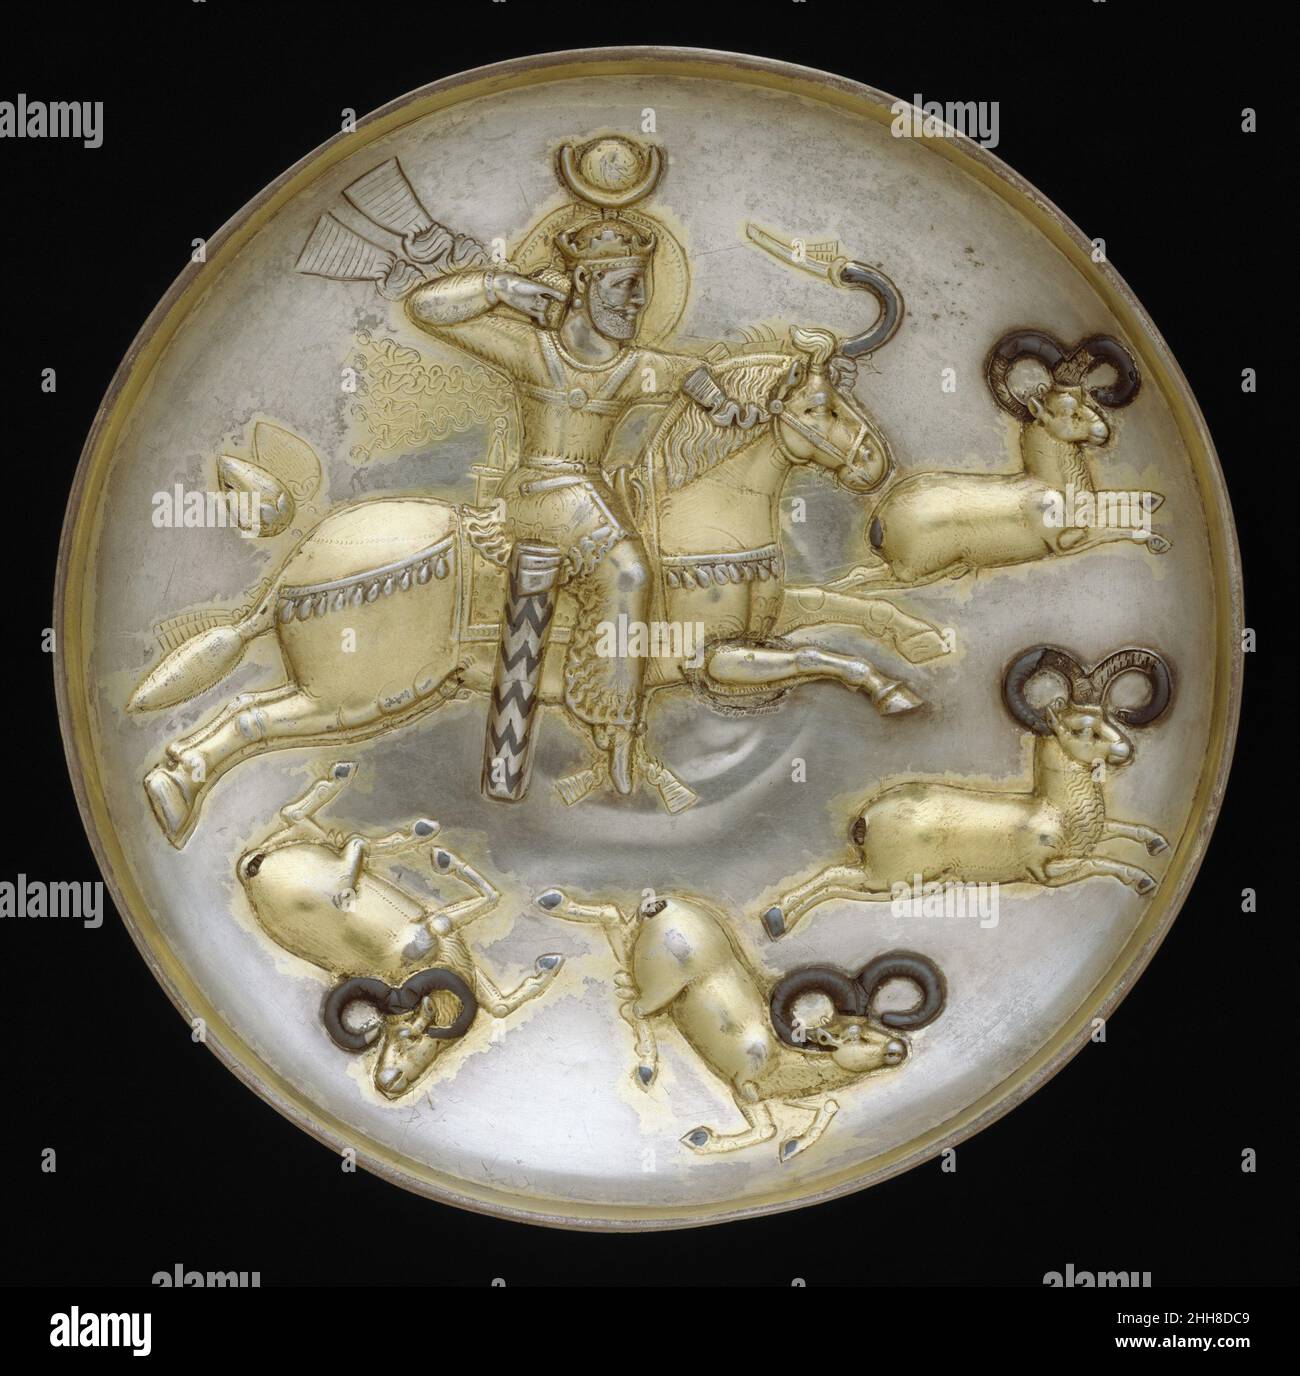 Plate with king hunting rams ca. A.D. mid-5th–mid-6th century Sasanian The king as hunter had become a standard royal image on silver plates during the reign of Shapur II (A.D. 310–379). The theme, symbolizing the prowess of Sasanian rulers, was used to decorate these royal plates, which were often sent as gifts to neighboring courts. The king has various royal attributes: a crown and fillet, covered globe, nimbus with beaded border, and beaded chest halter with fluttering ribbons. The identity of the Sasanian king on this plate is uncertain. His crown identifies him as either Peroz (r. 459–48 Stock Photo